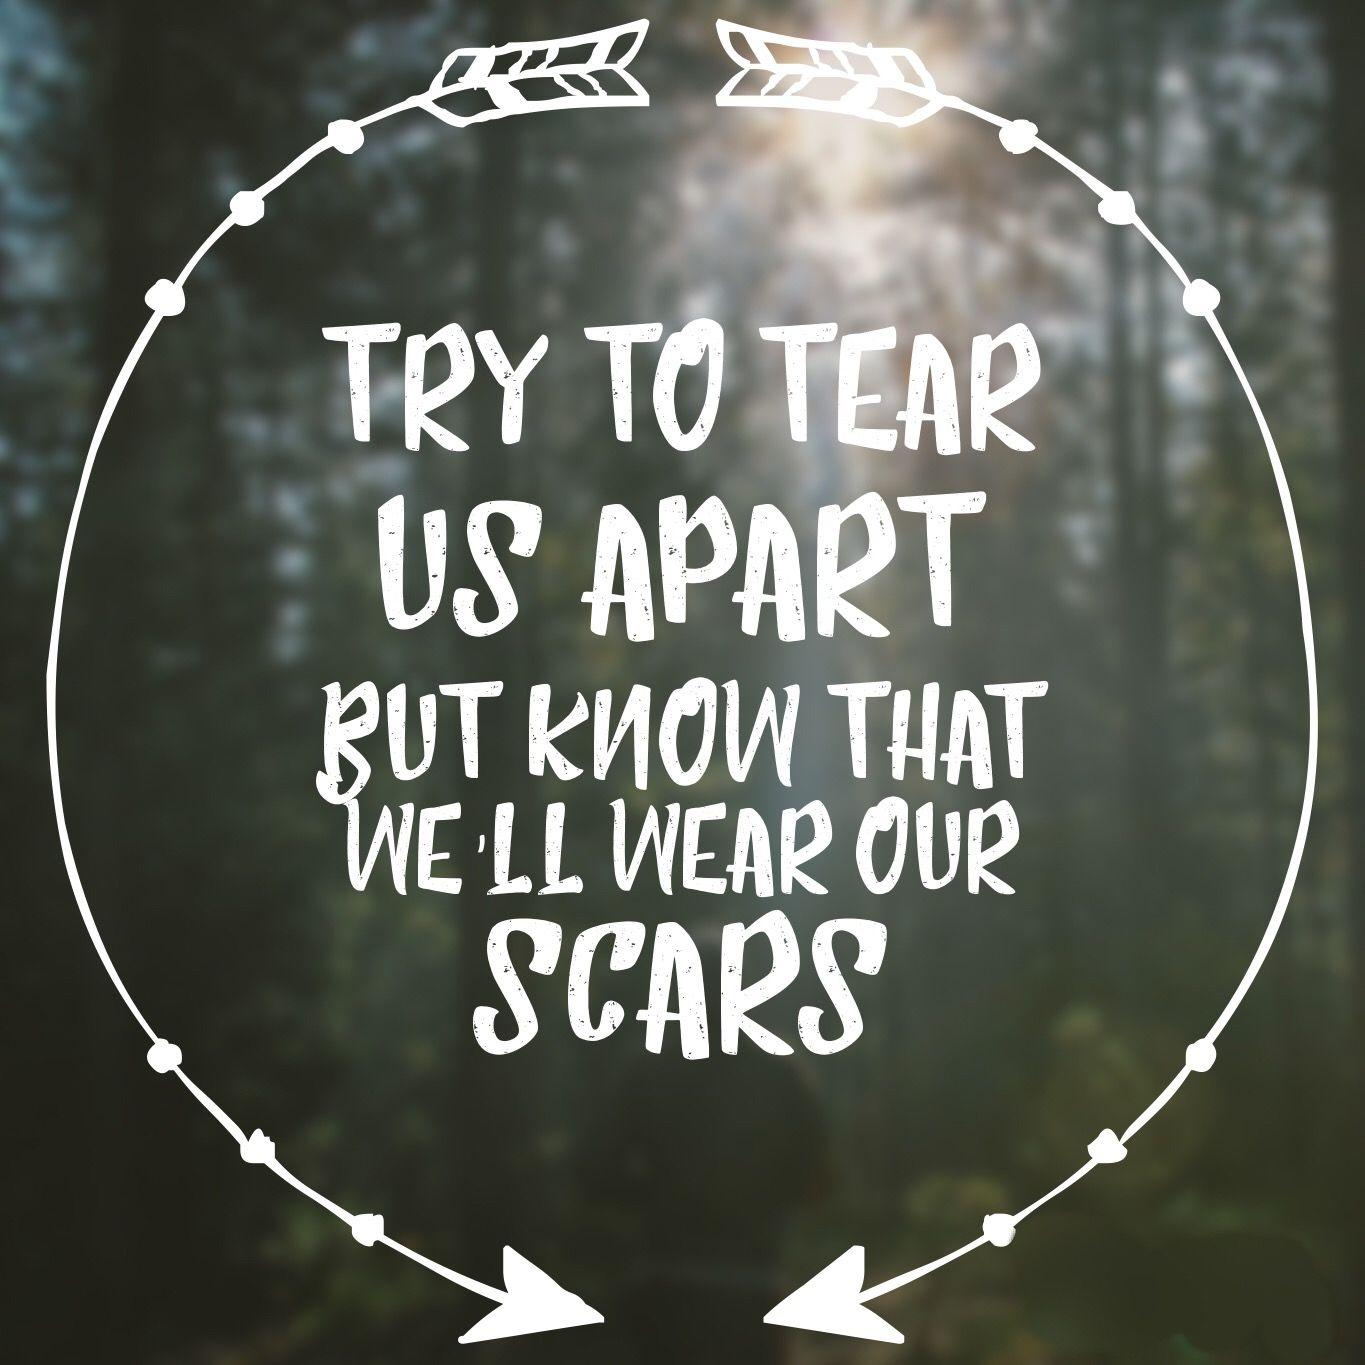 I Prevail Scars Band Quote. Bands. Band quotes